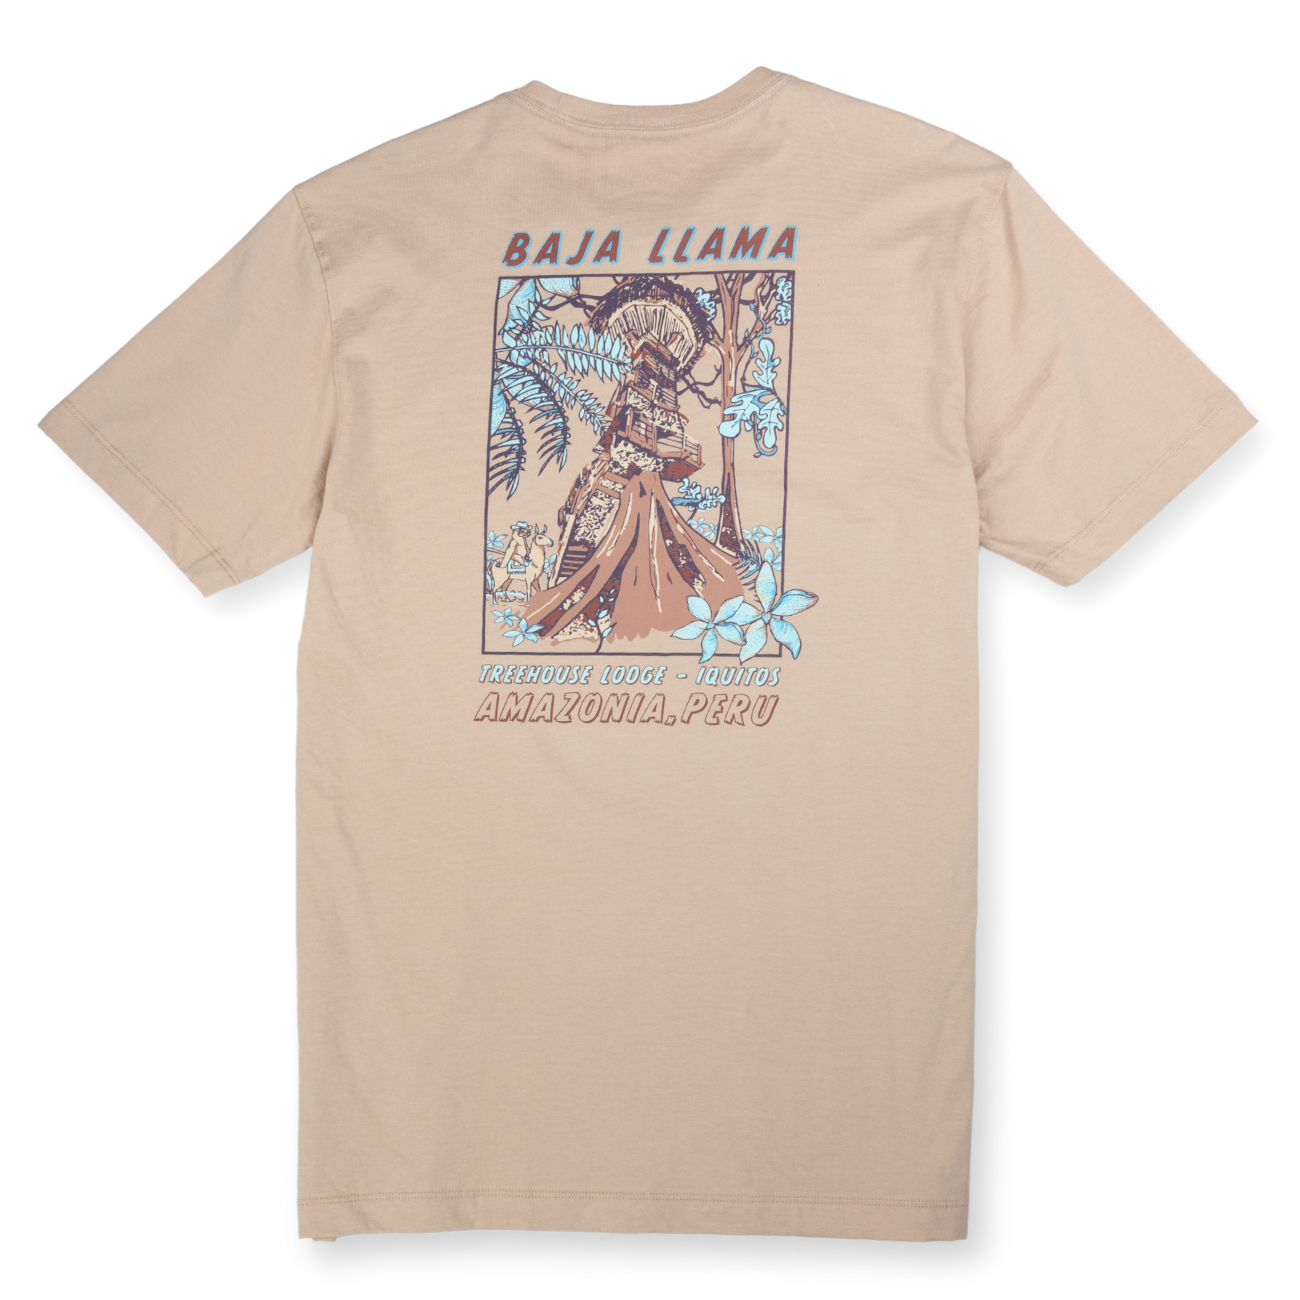 Baja Llama tan graphic tee with Peruvian Amazon treehouse print in brown and turquoise